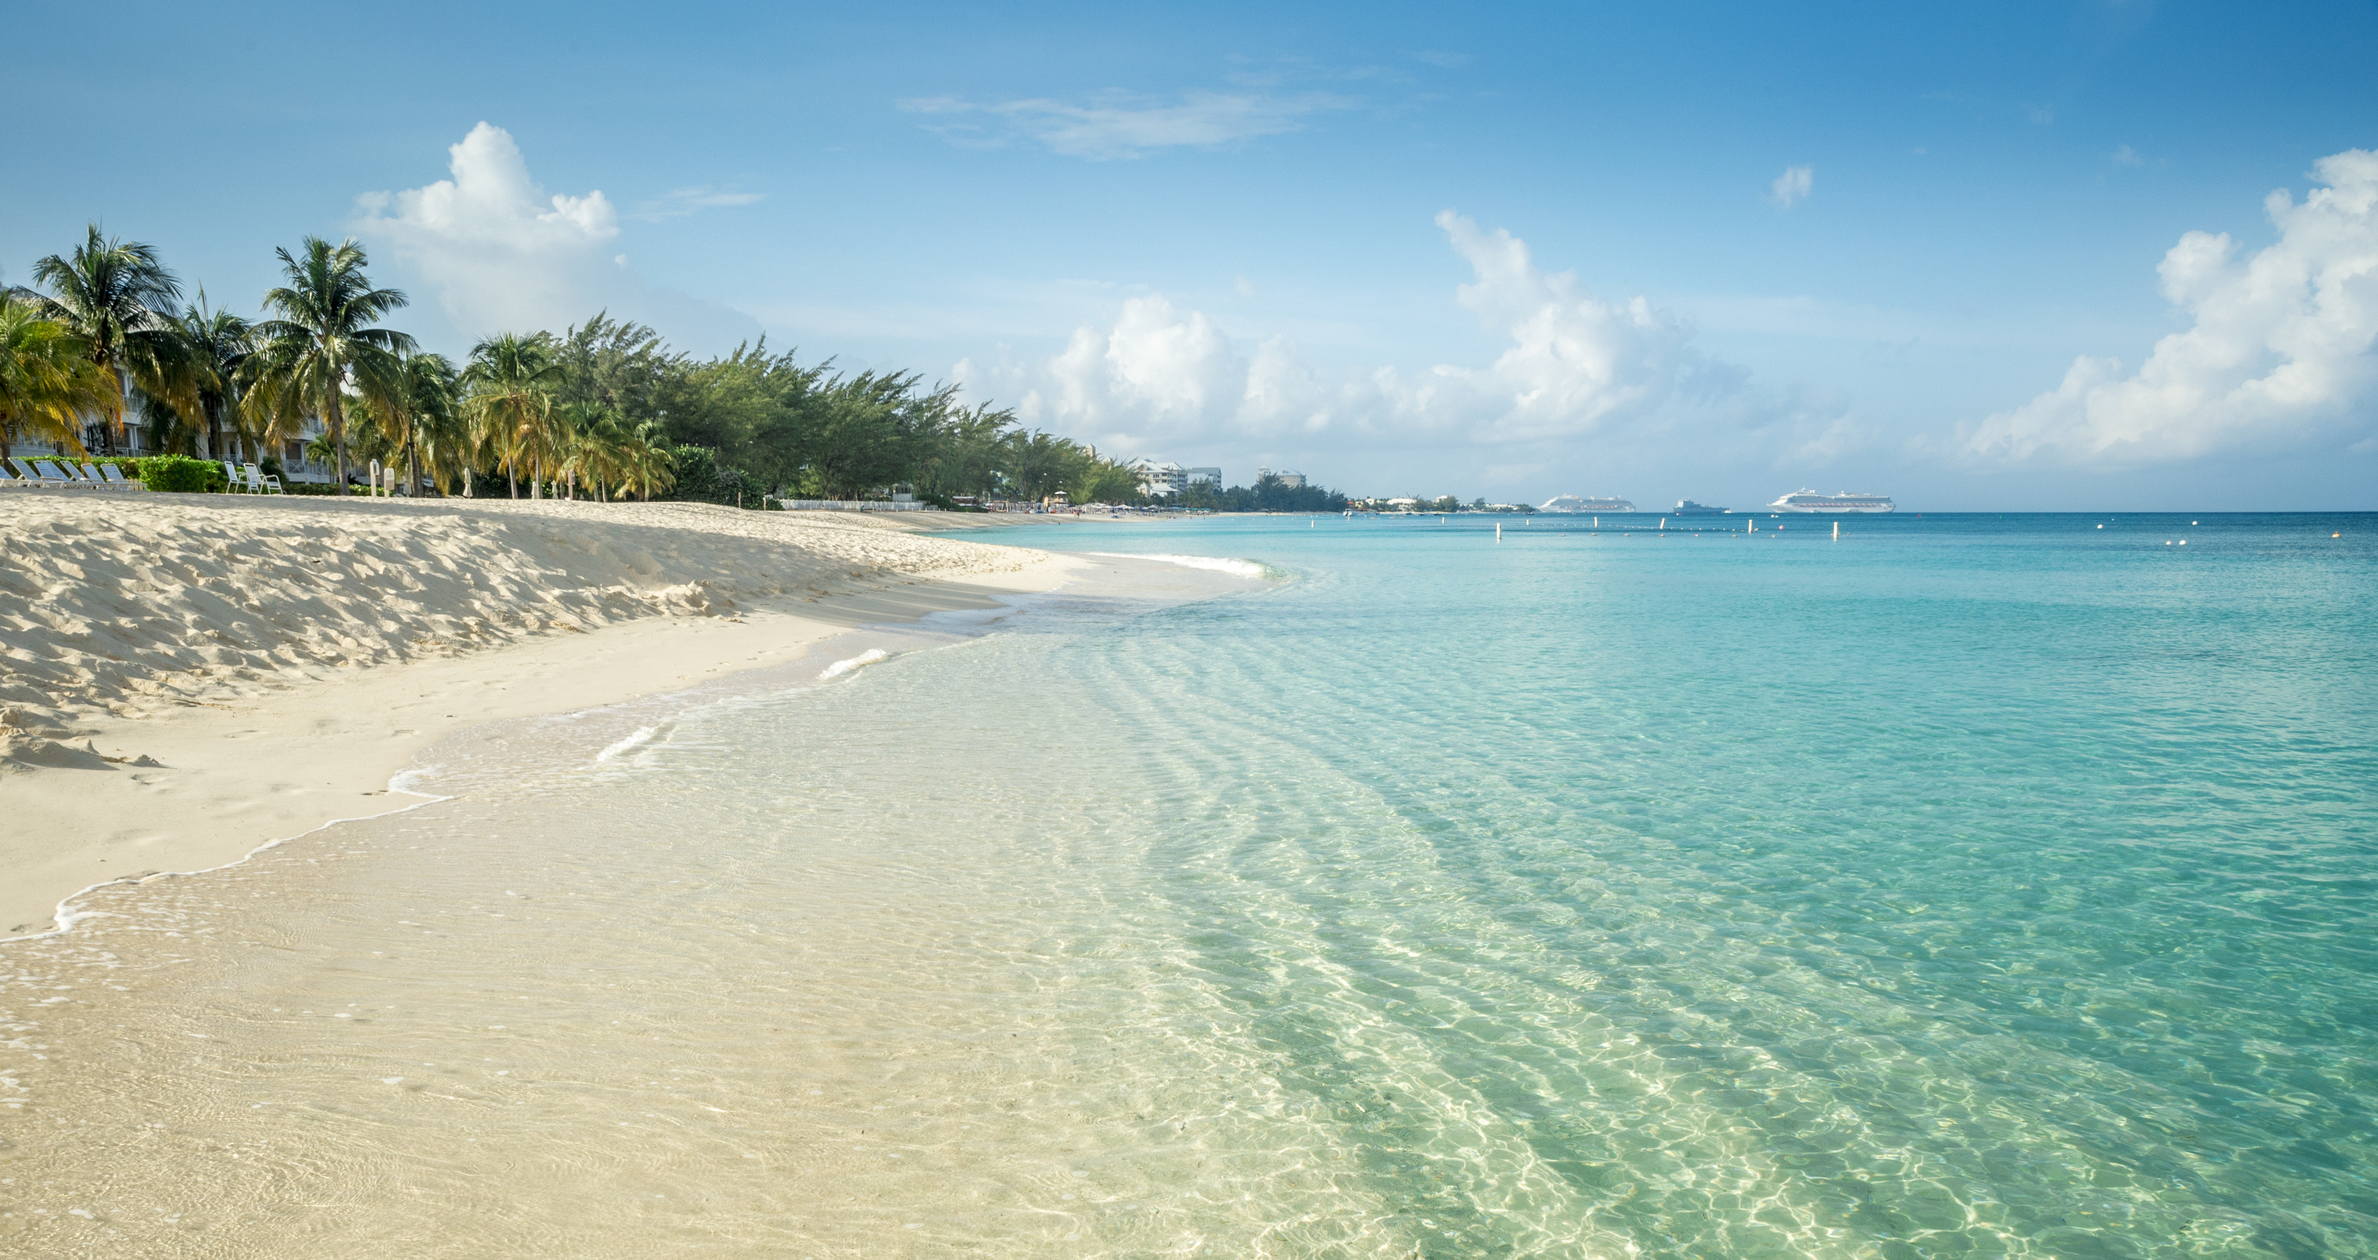 Flights to Grand Cayman in the $100s and $200s round-trip!